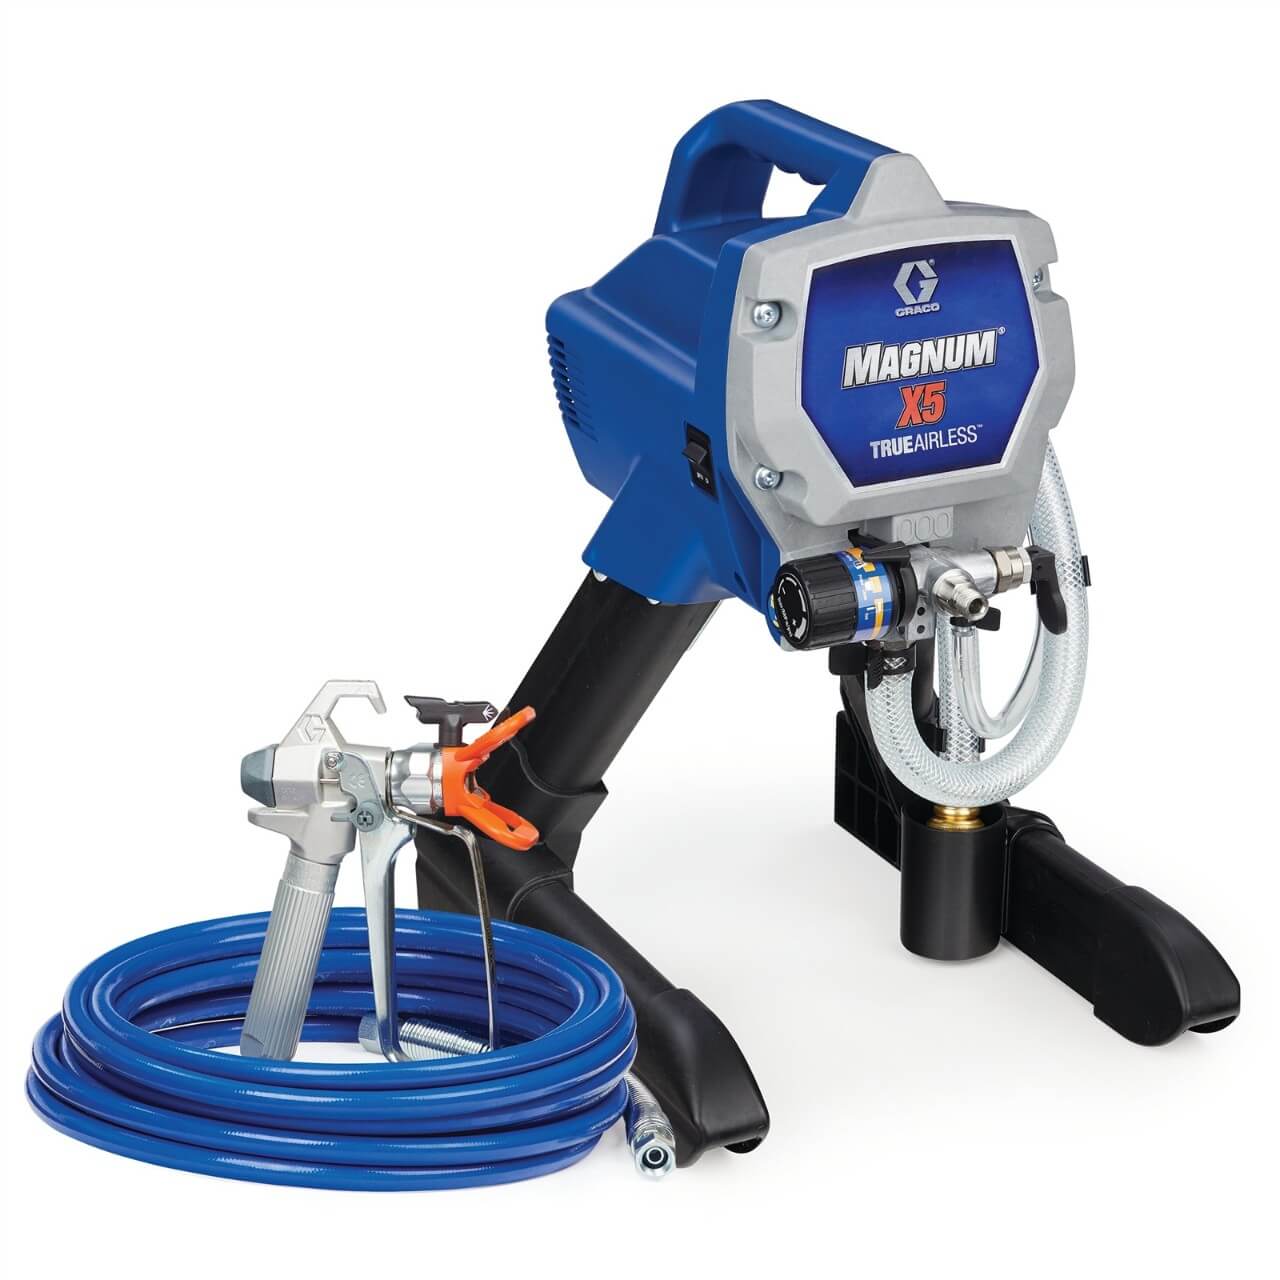 How to Clean a Graco Paint Sprayer With Dried Paint – Comprehensive Guide with Tips